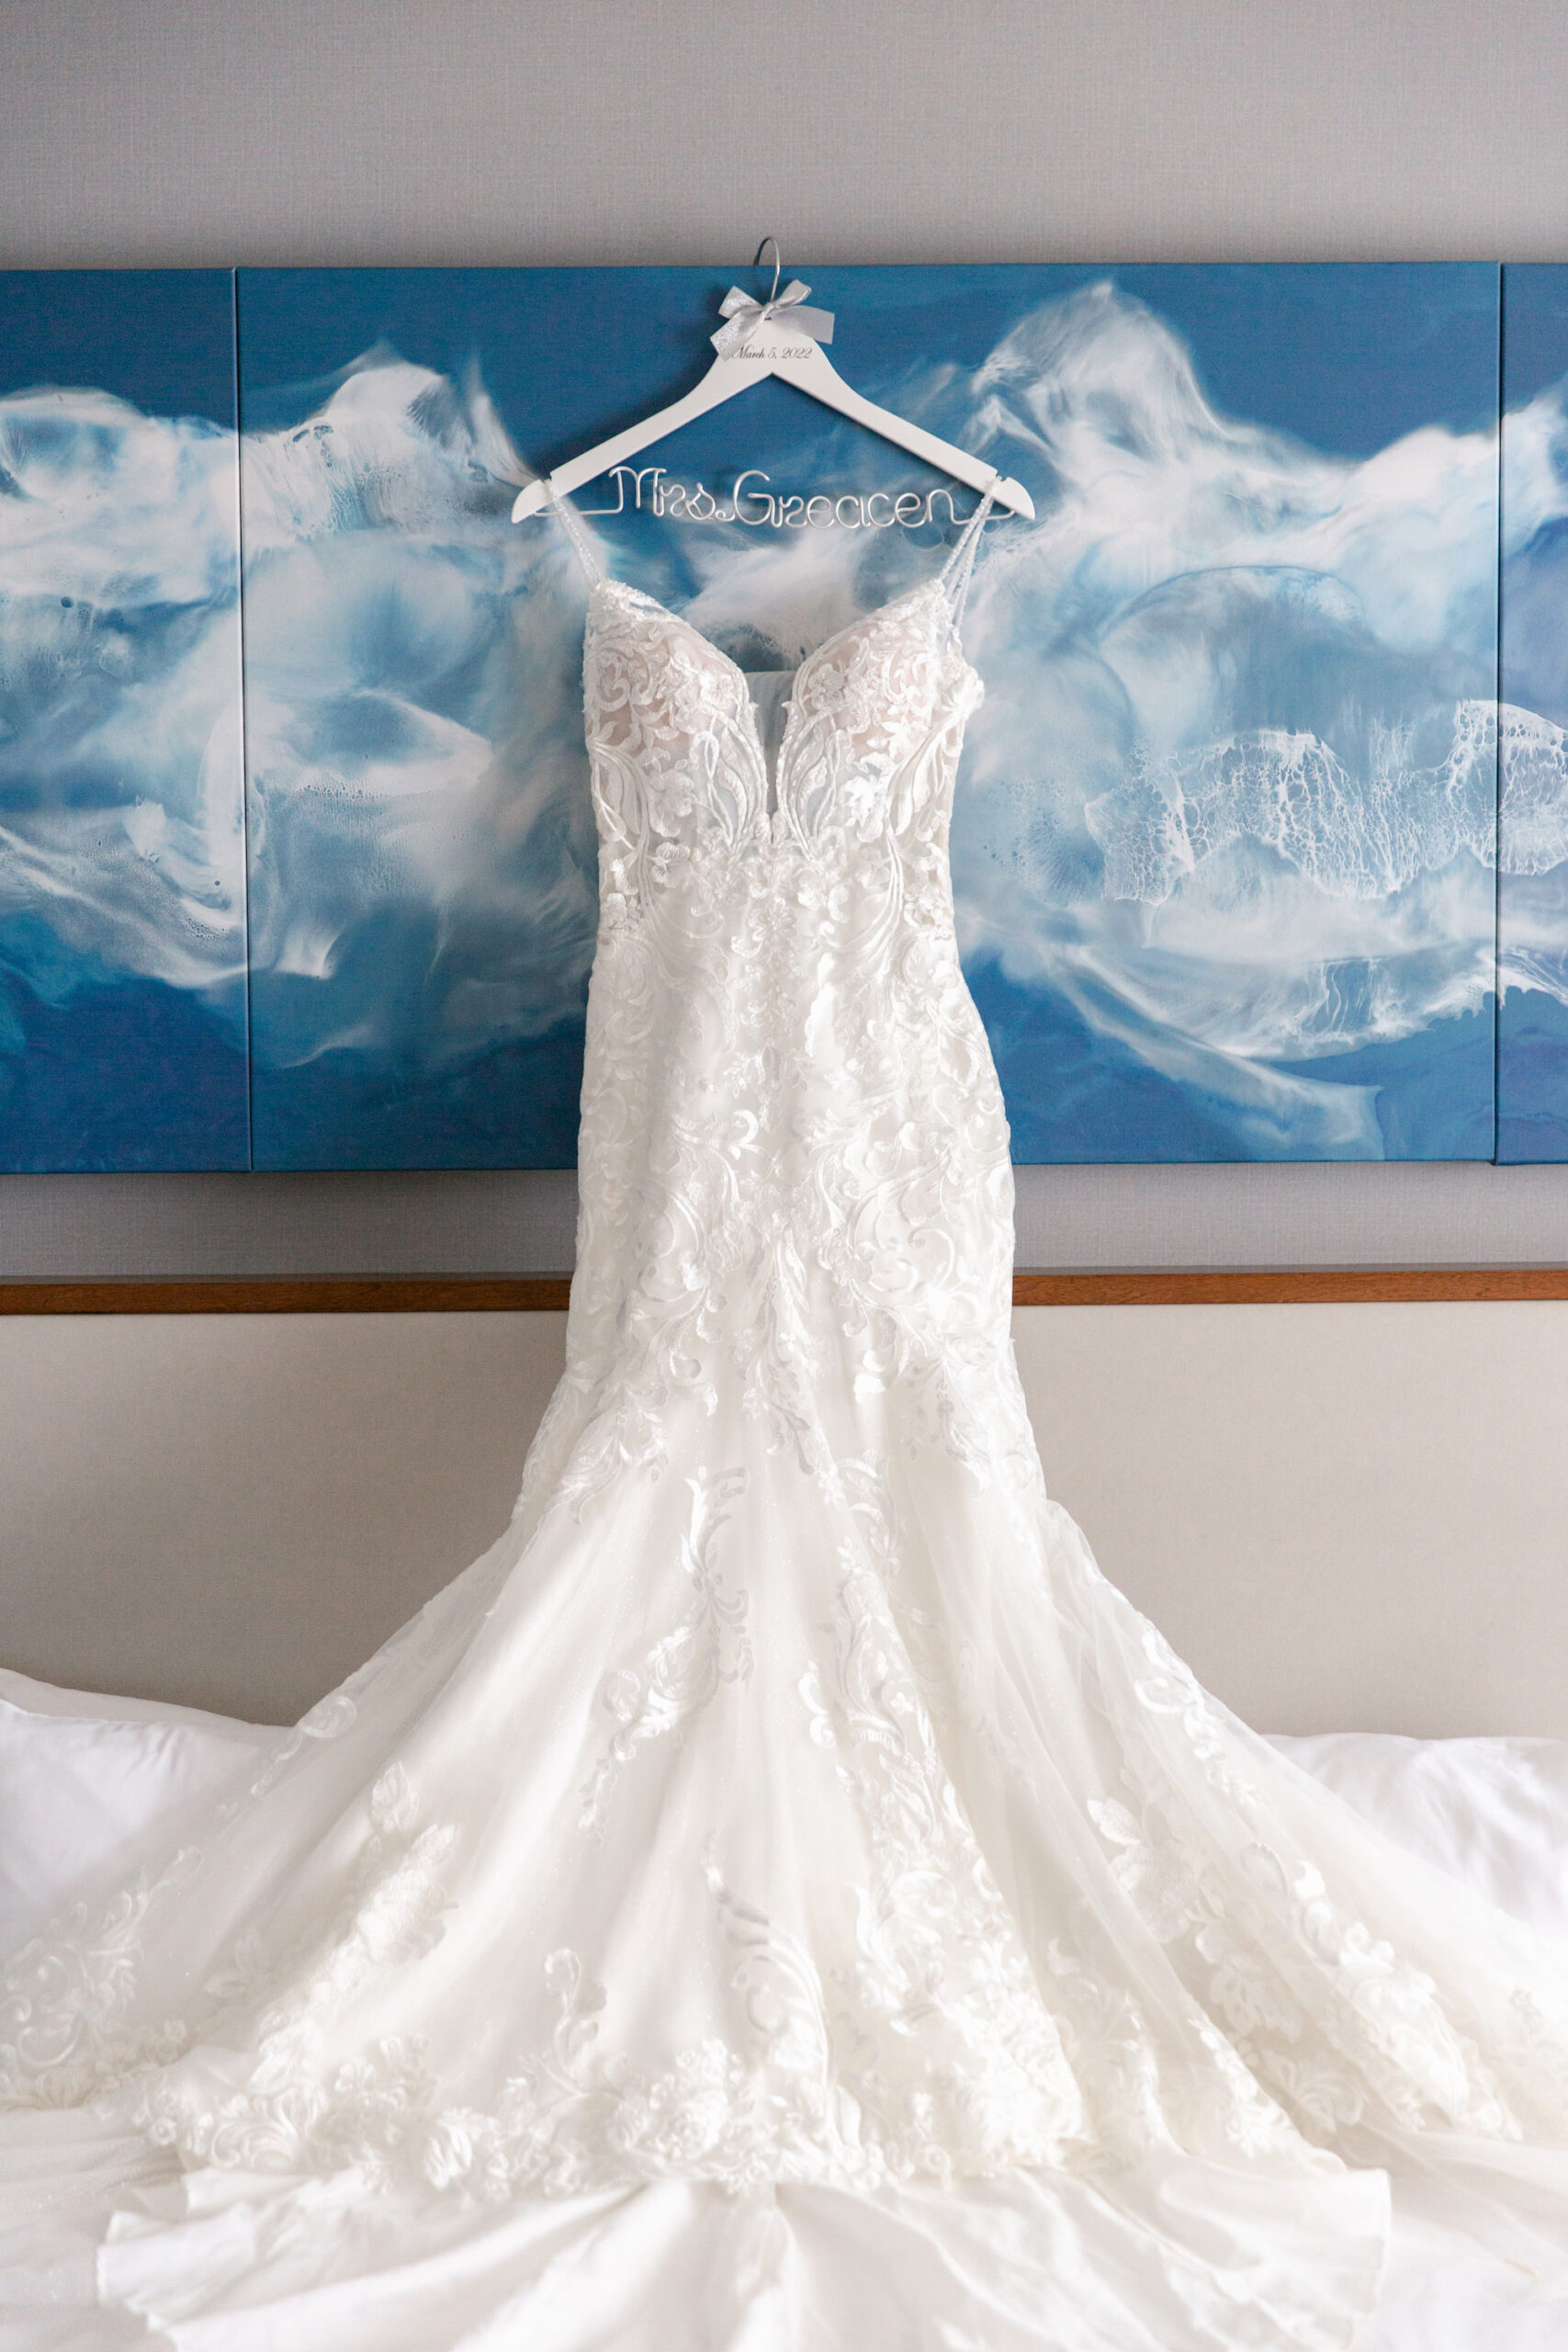 Wedding Dress Hanging with Custom Last Name Hanger, Fit and Flare Lace Embroidered Gown with Deep V Neckline